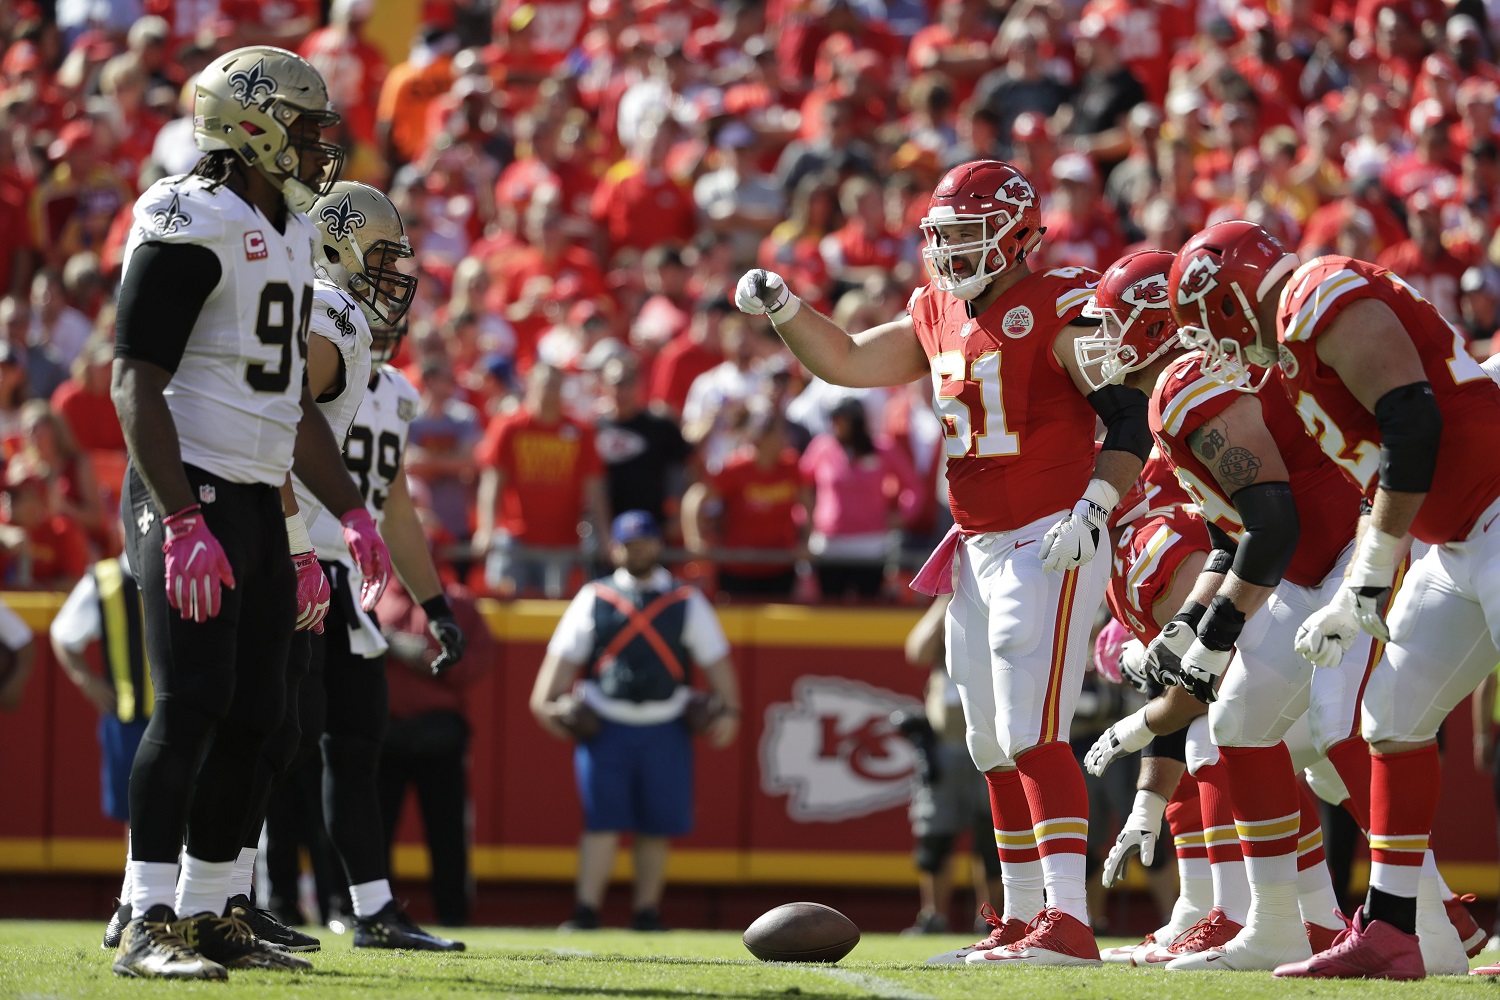 Kansas City Chiefs offensive lineman Mitch Morse (61) stands over the ball at the line of scrimmage during the first half of an NFL football game against the New Orleans Saints in Kansas City, Mo., Sunday, Oct. 23, 2016. (AP Photo/Jeff Roberson)